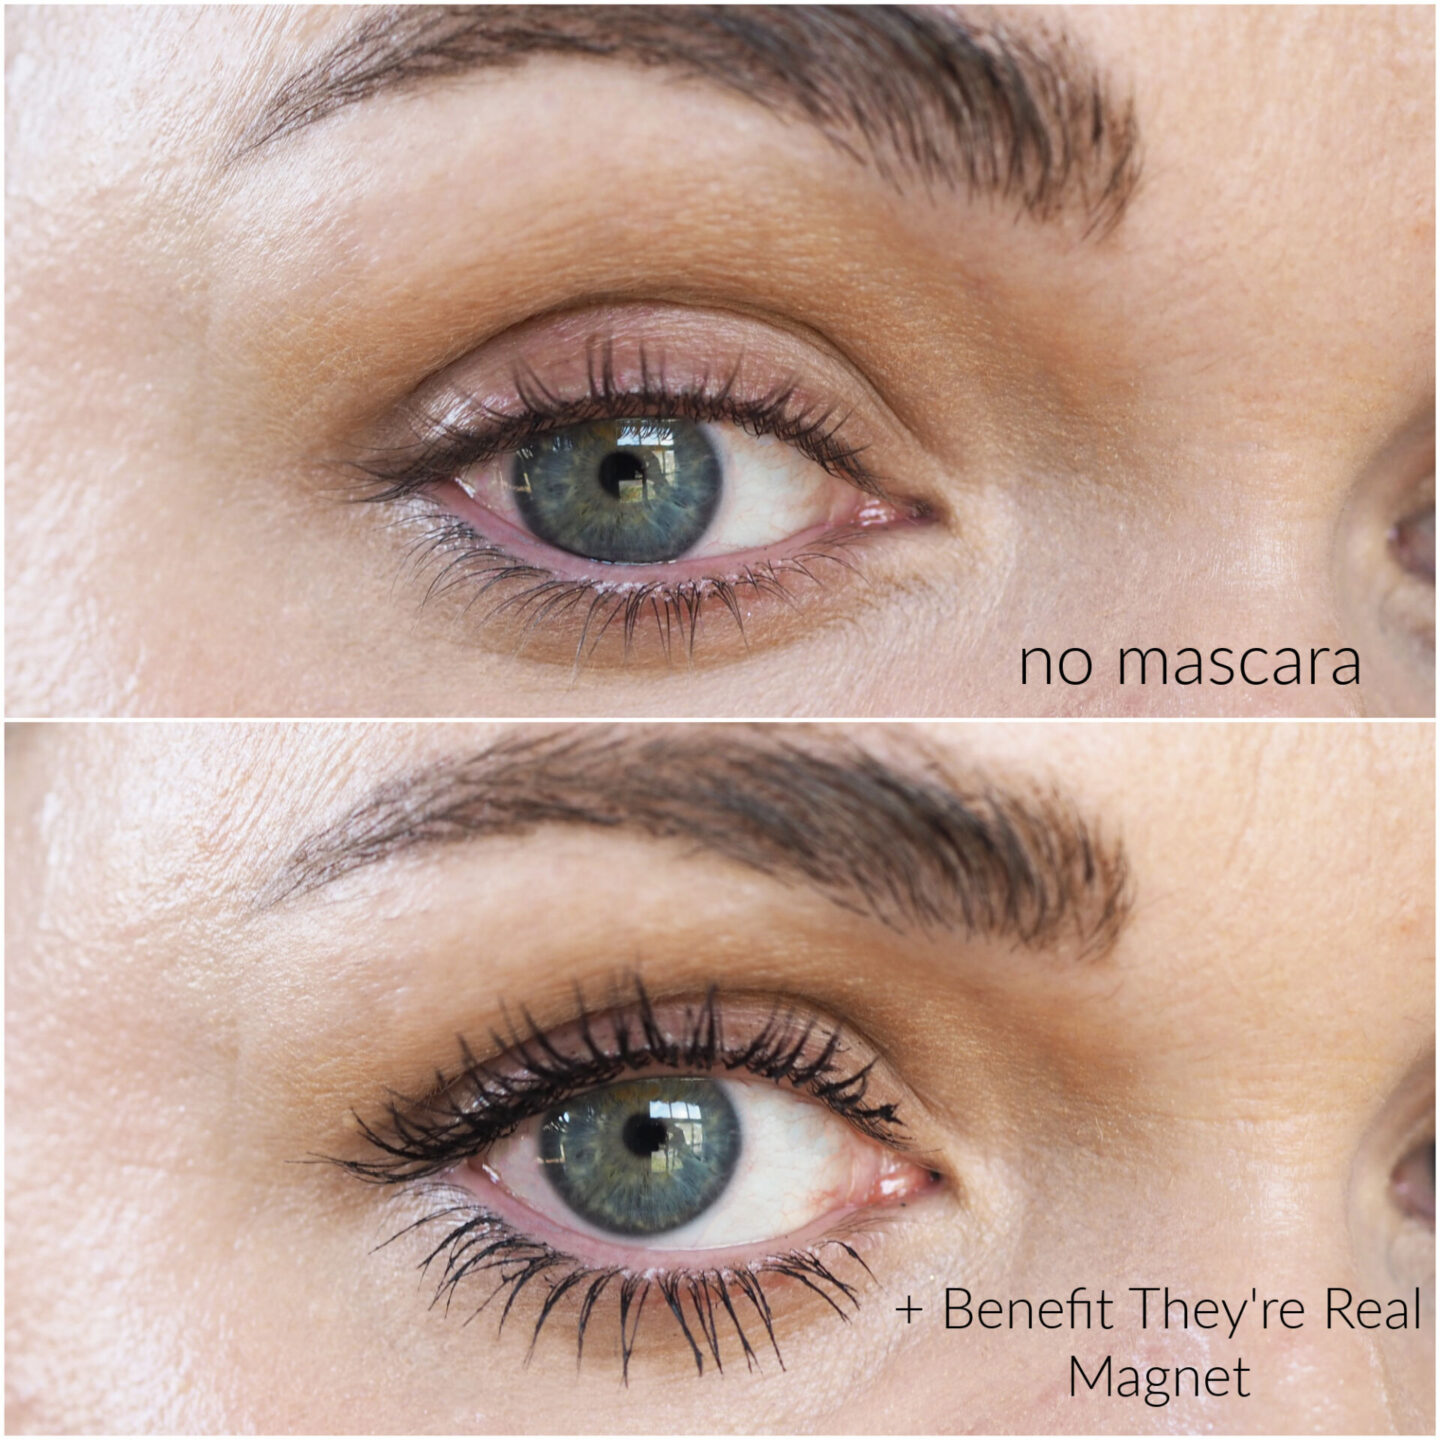 Benefit They're Real magnet mascara review before after